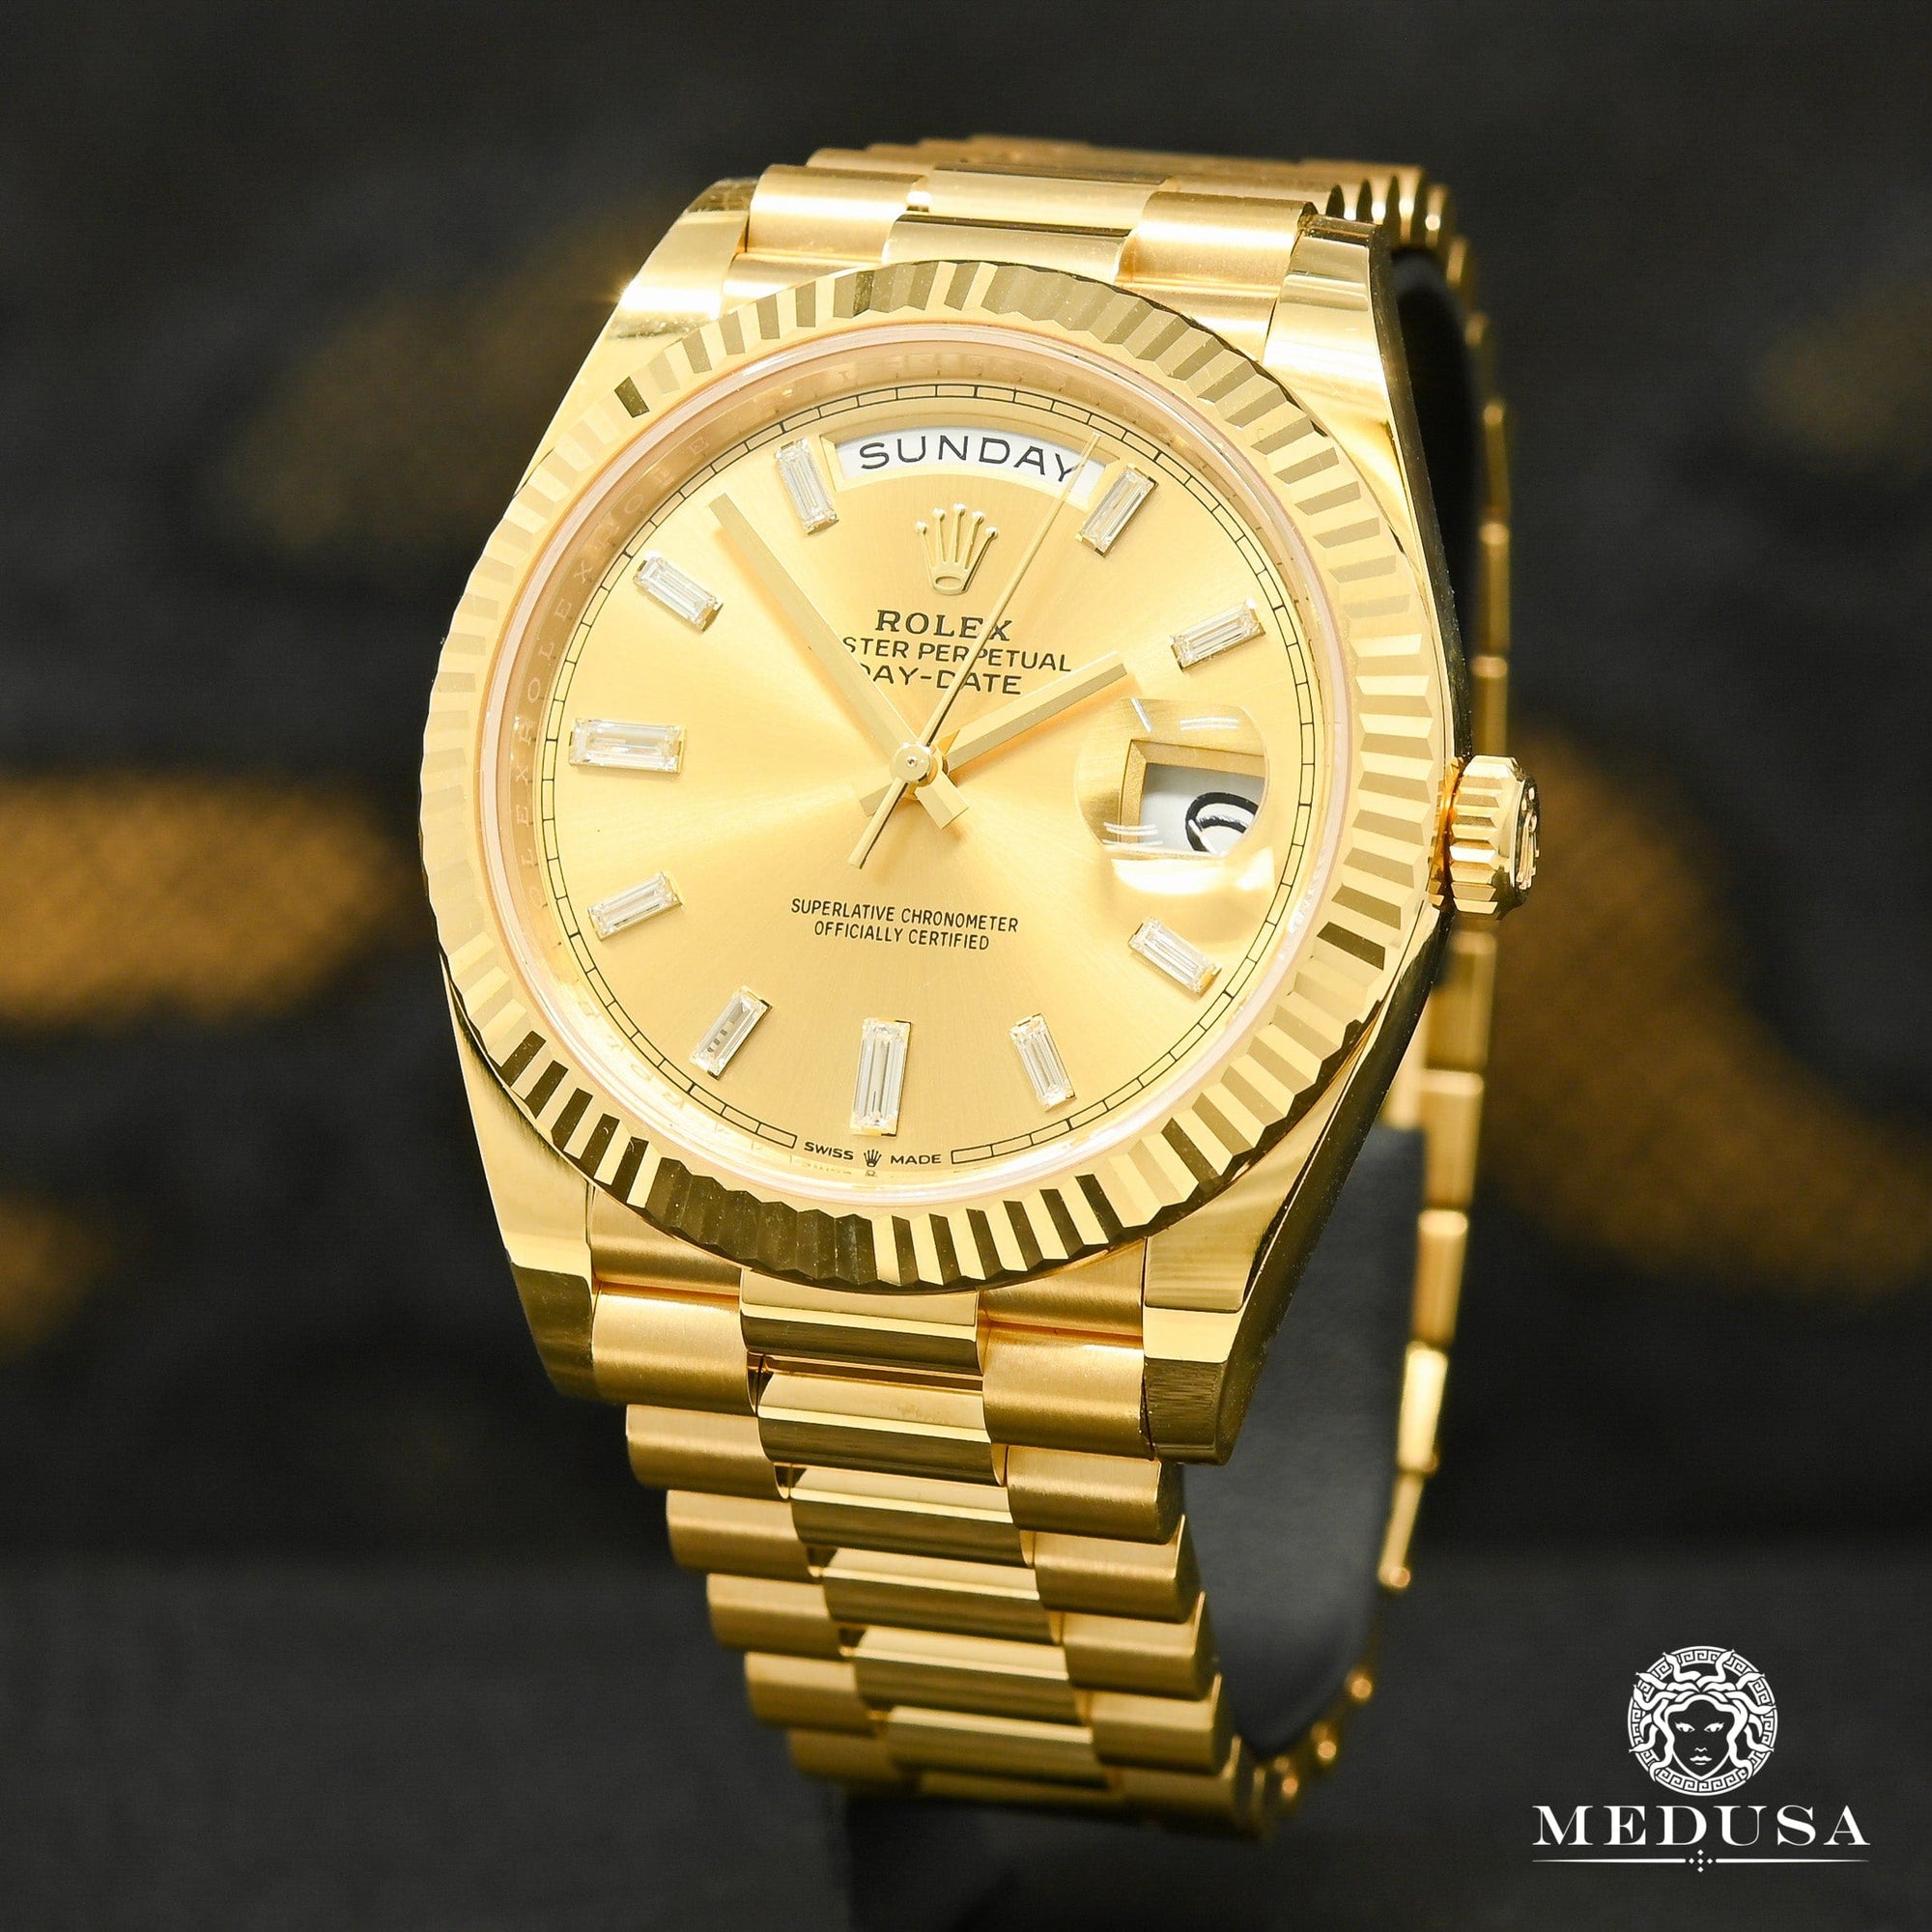 Montre Rolex | Homme President Day-Date 40mm - Champagne Baguette Or Jaune